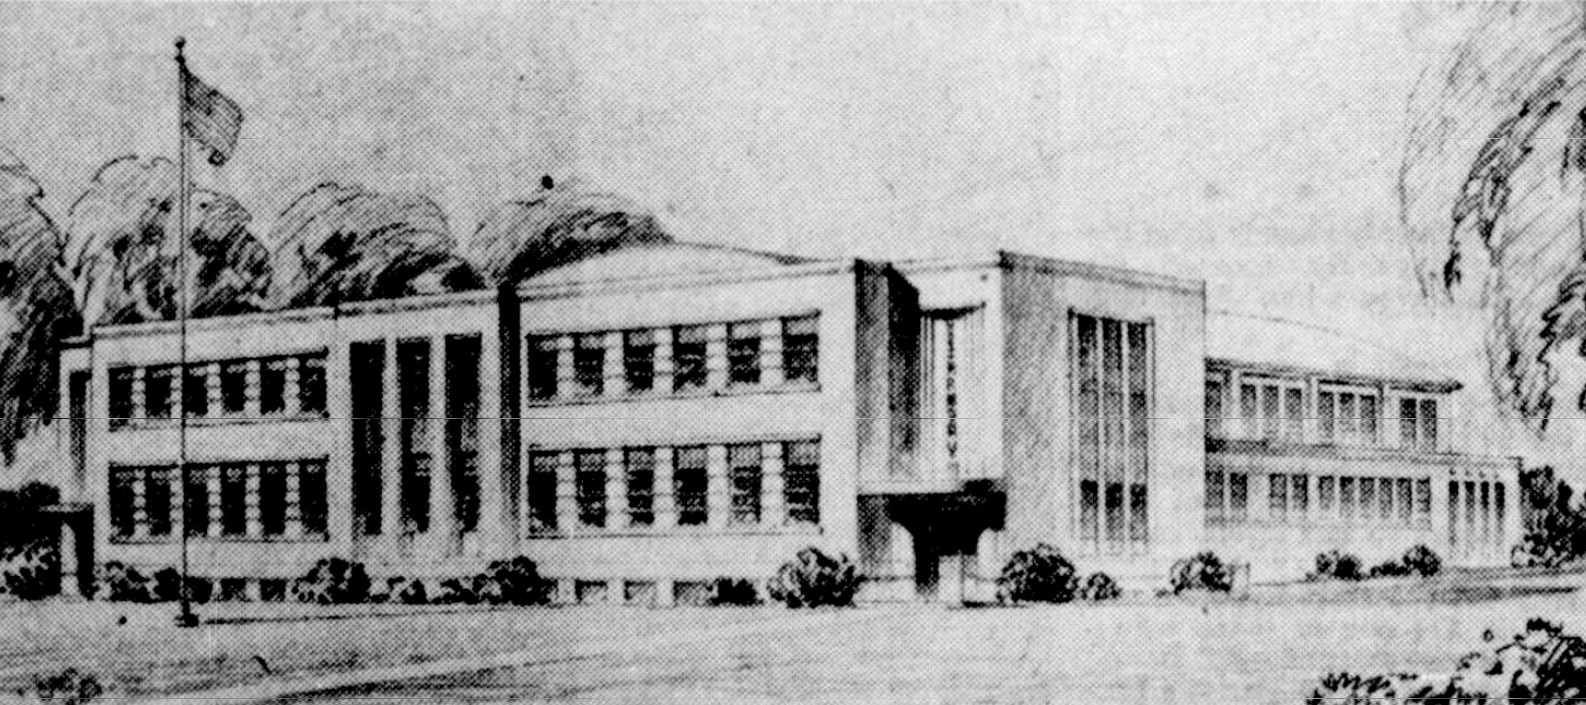 Architect's rendering of the Stoughton Armory published in the February 2nd, 1941 issue of the Madison Wisconsin State Journal